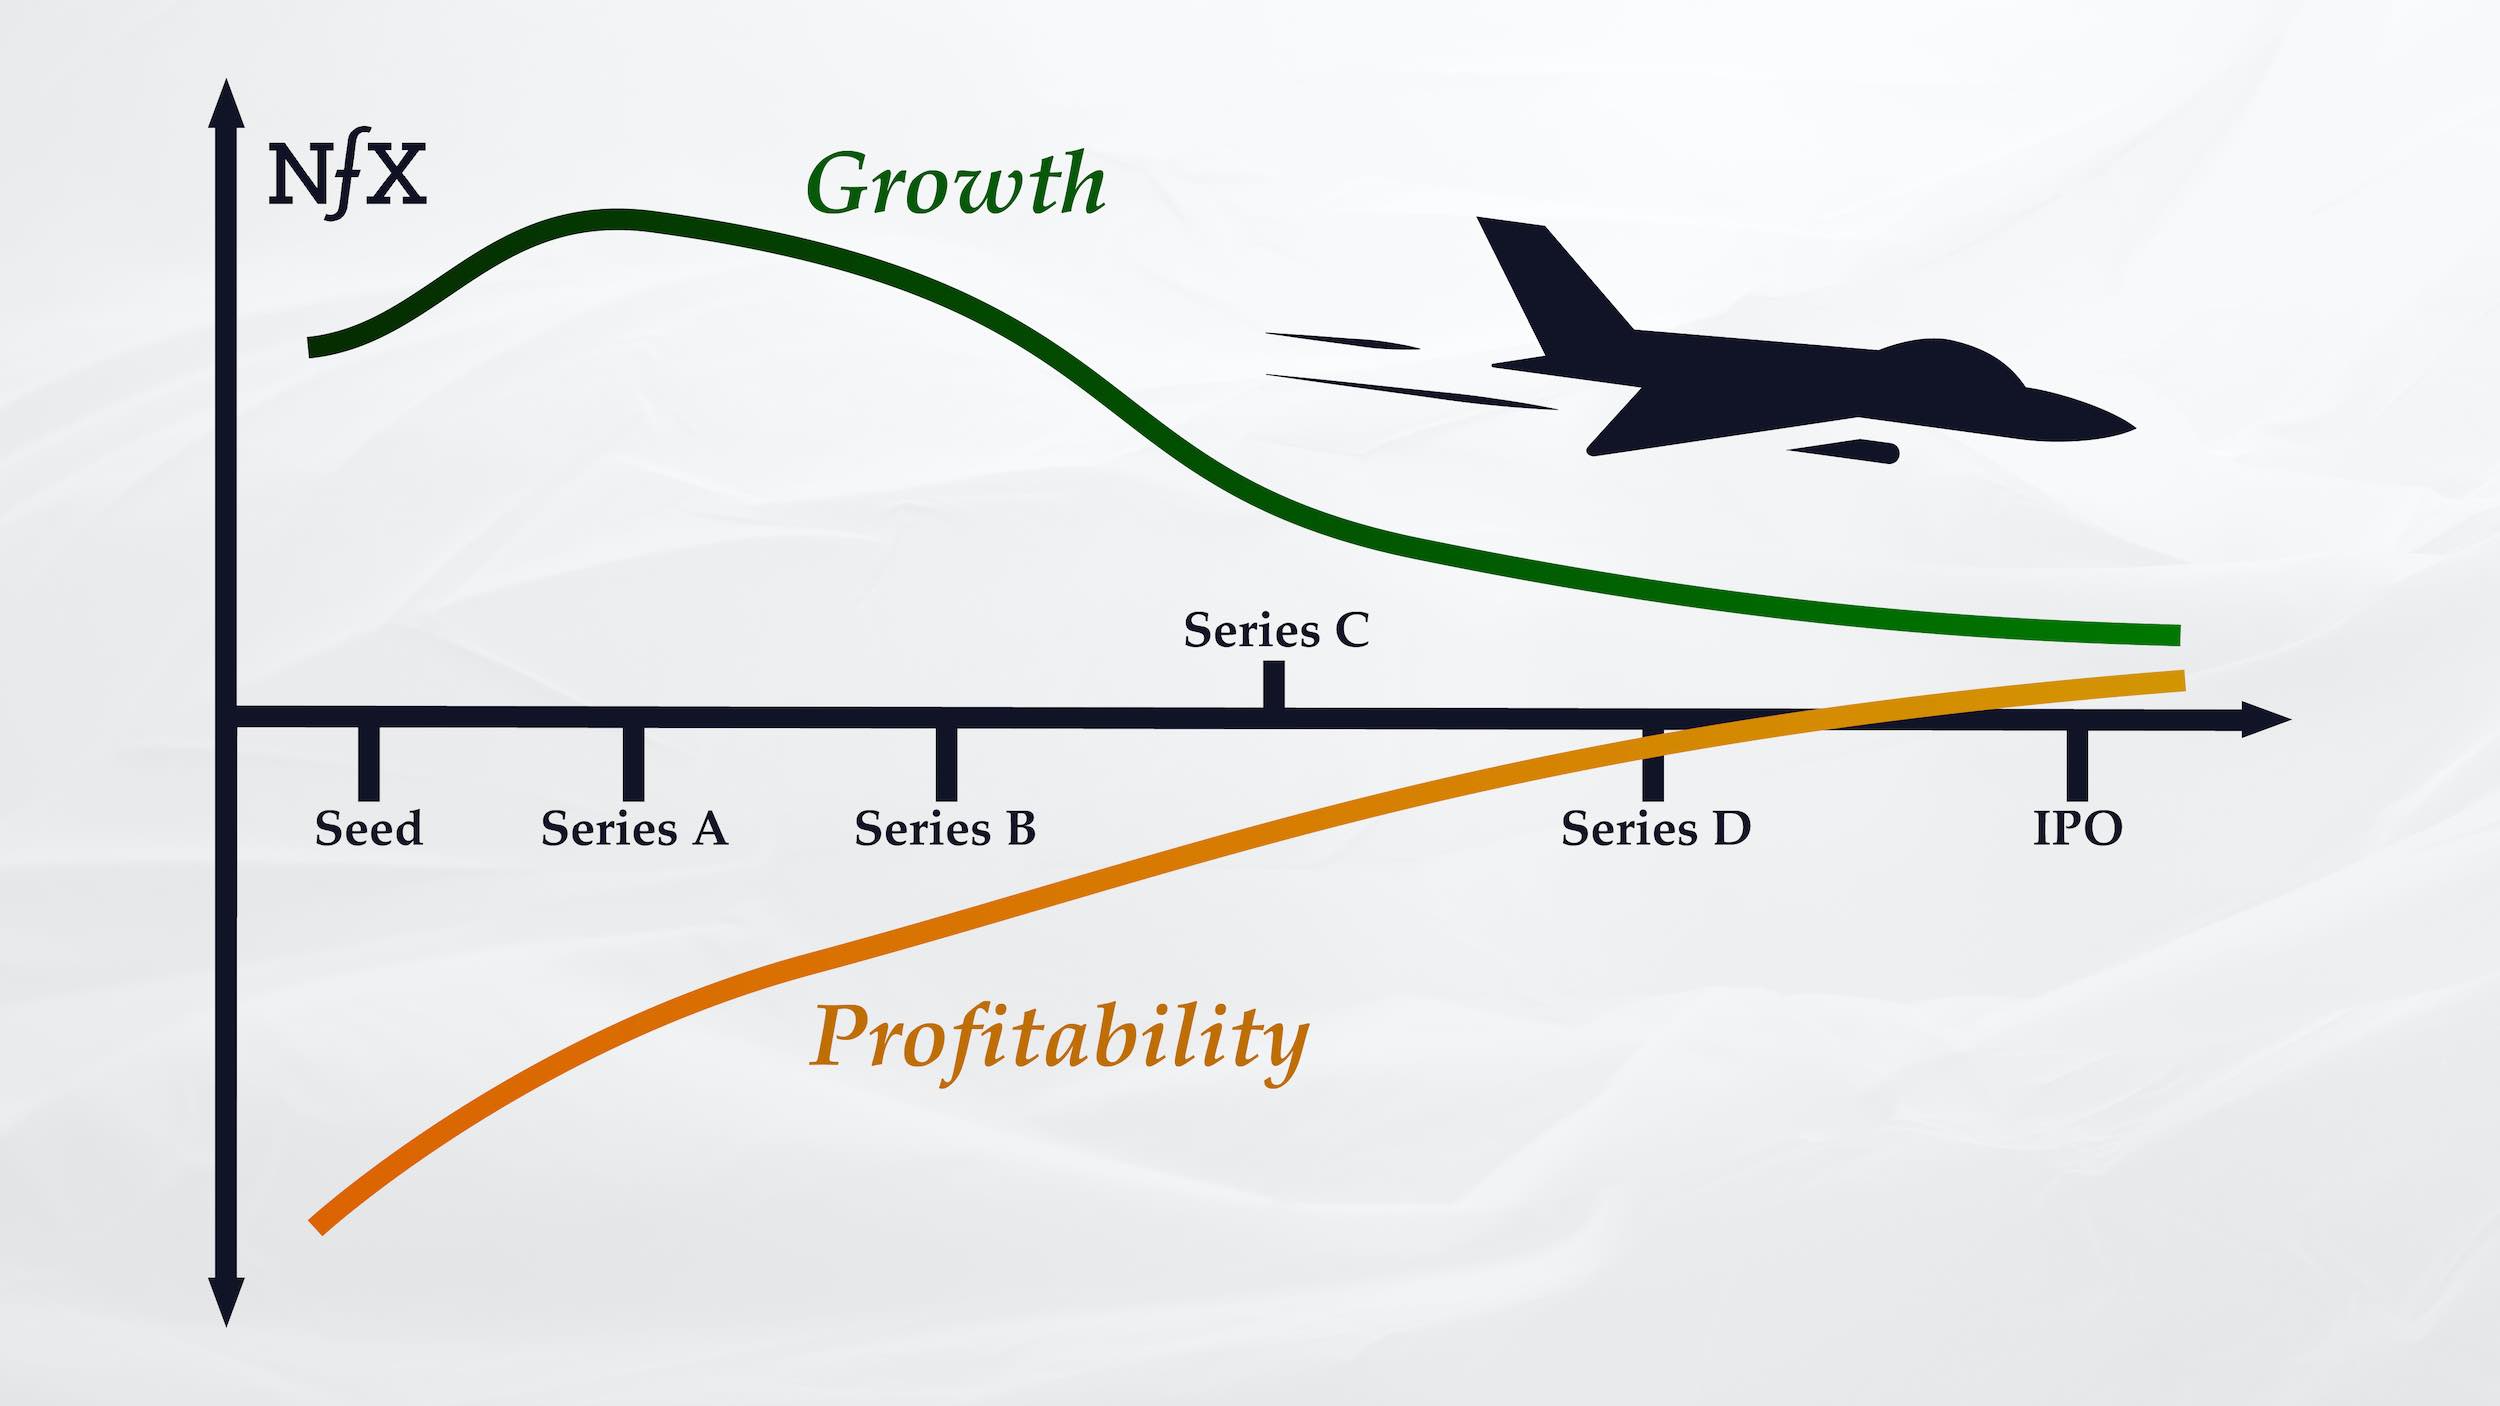 The New Rules of Growth vs. Profitability